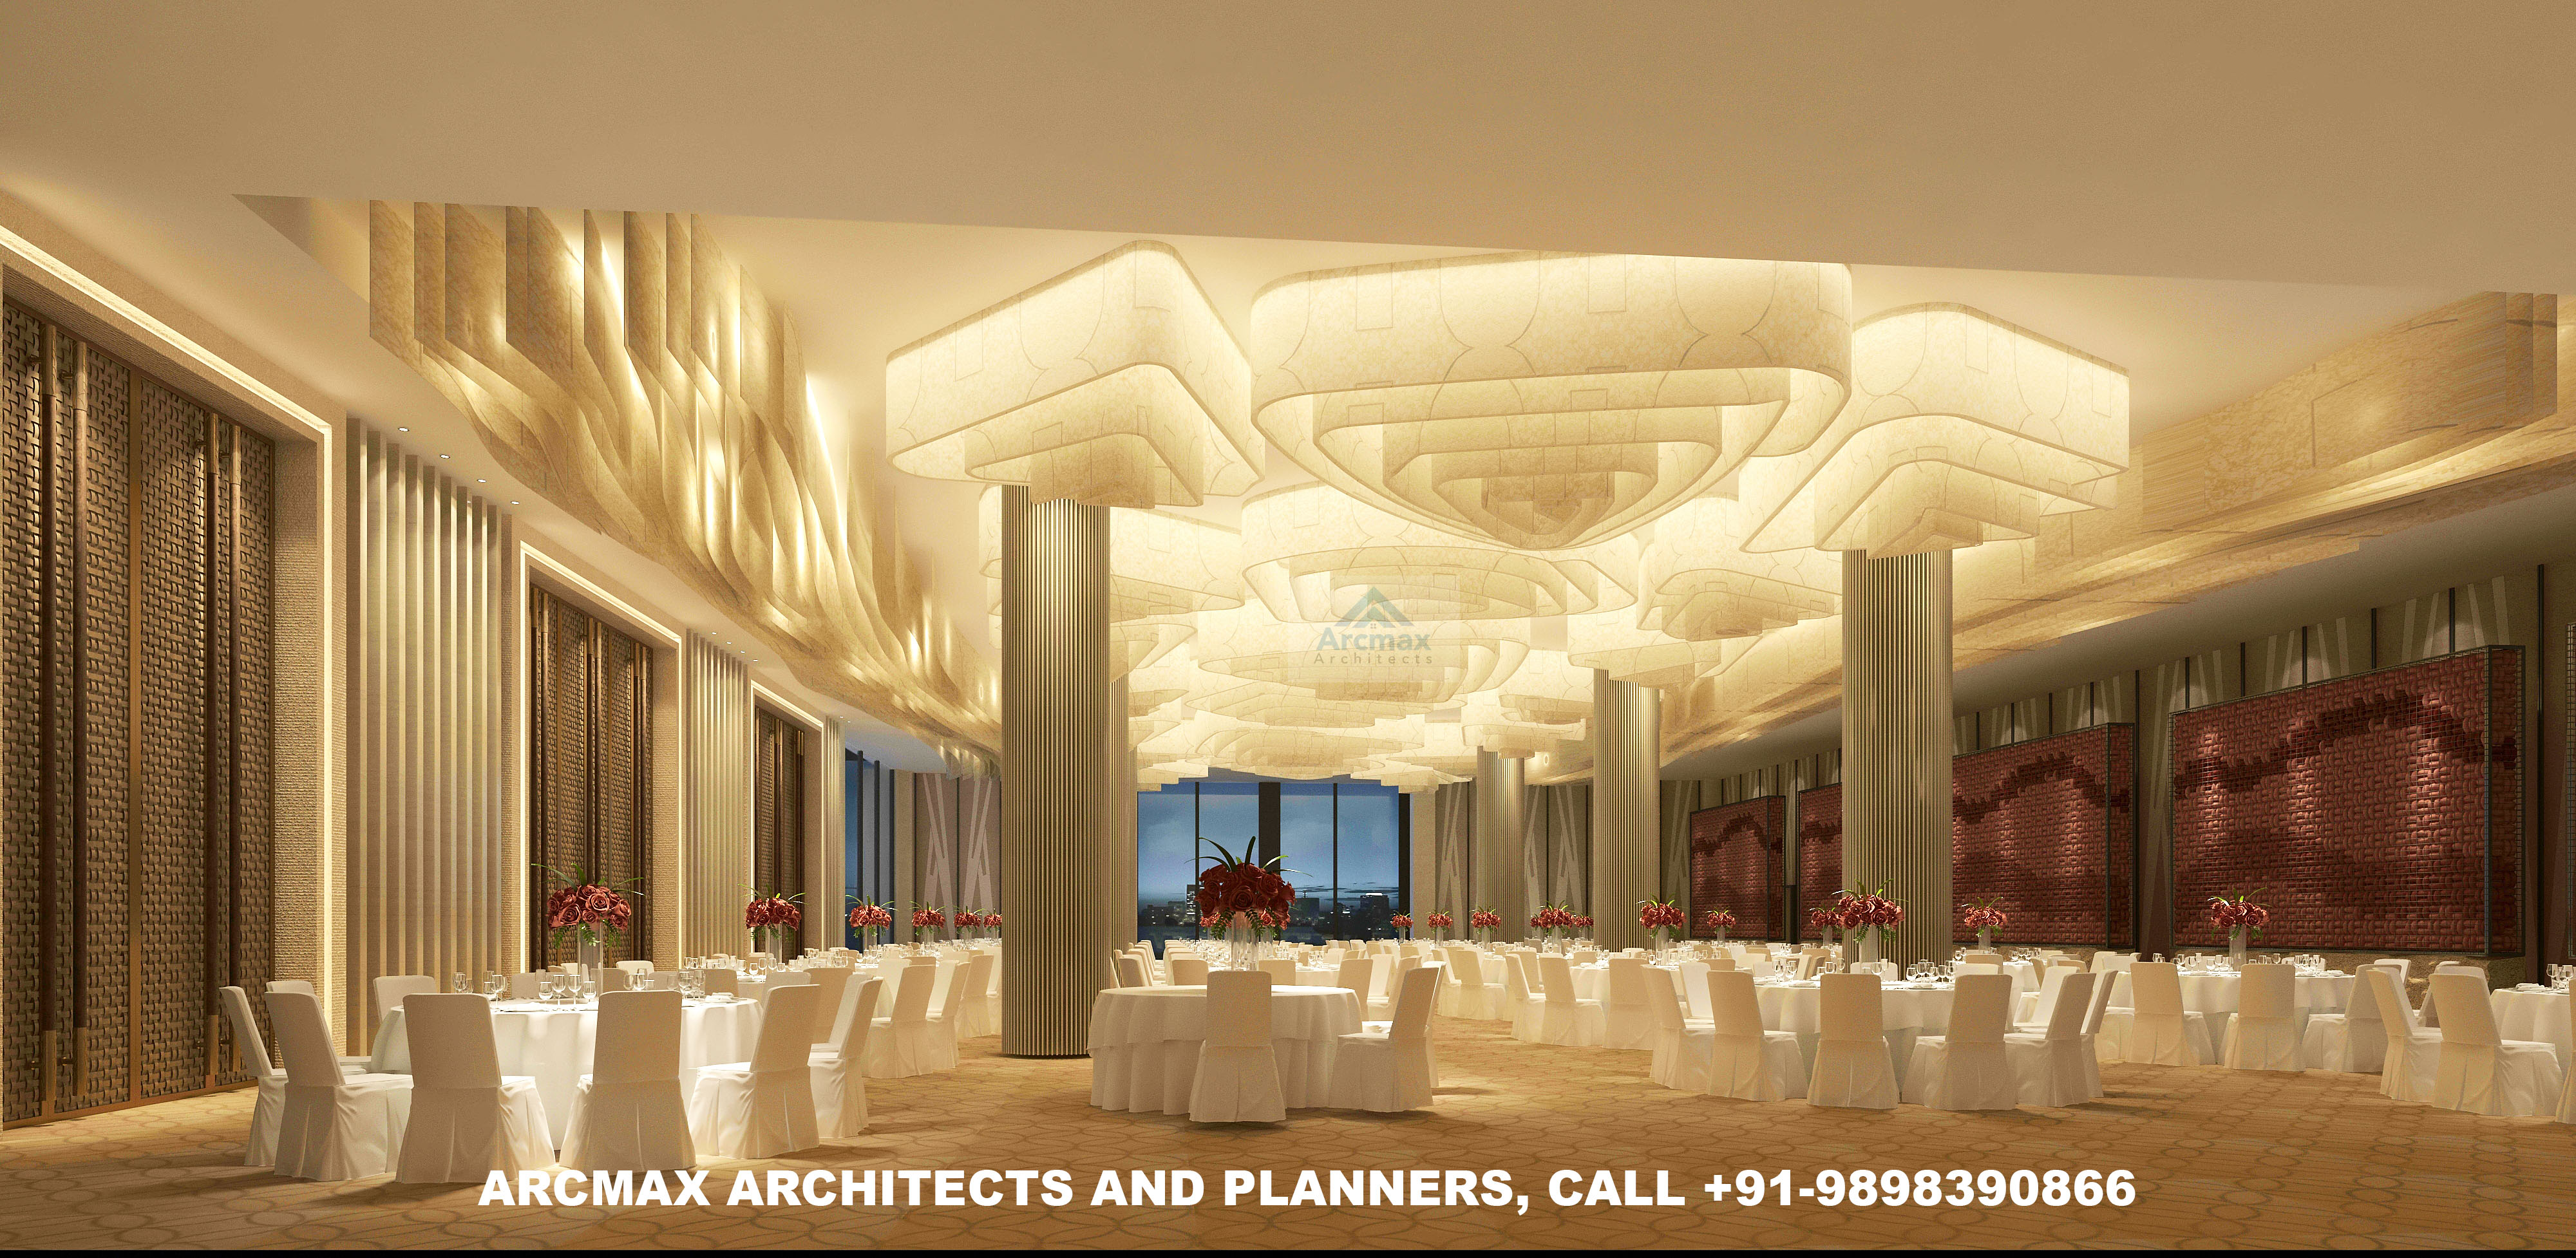 Best Architects For Banquet Hall Design And Planning 